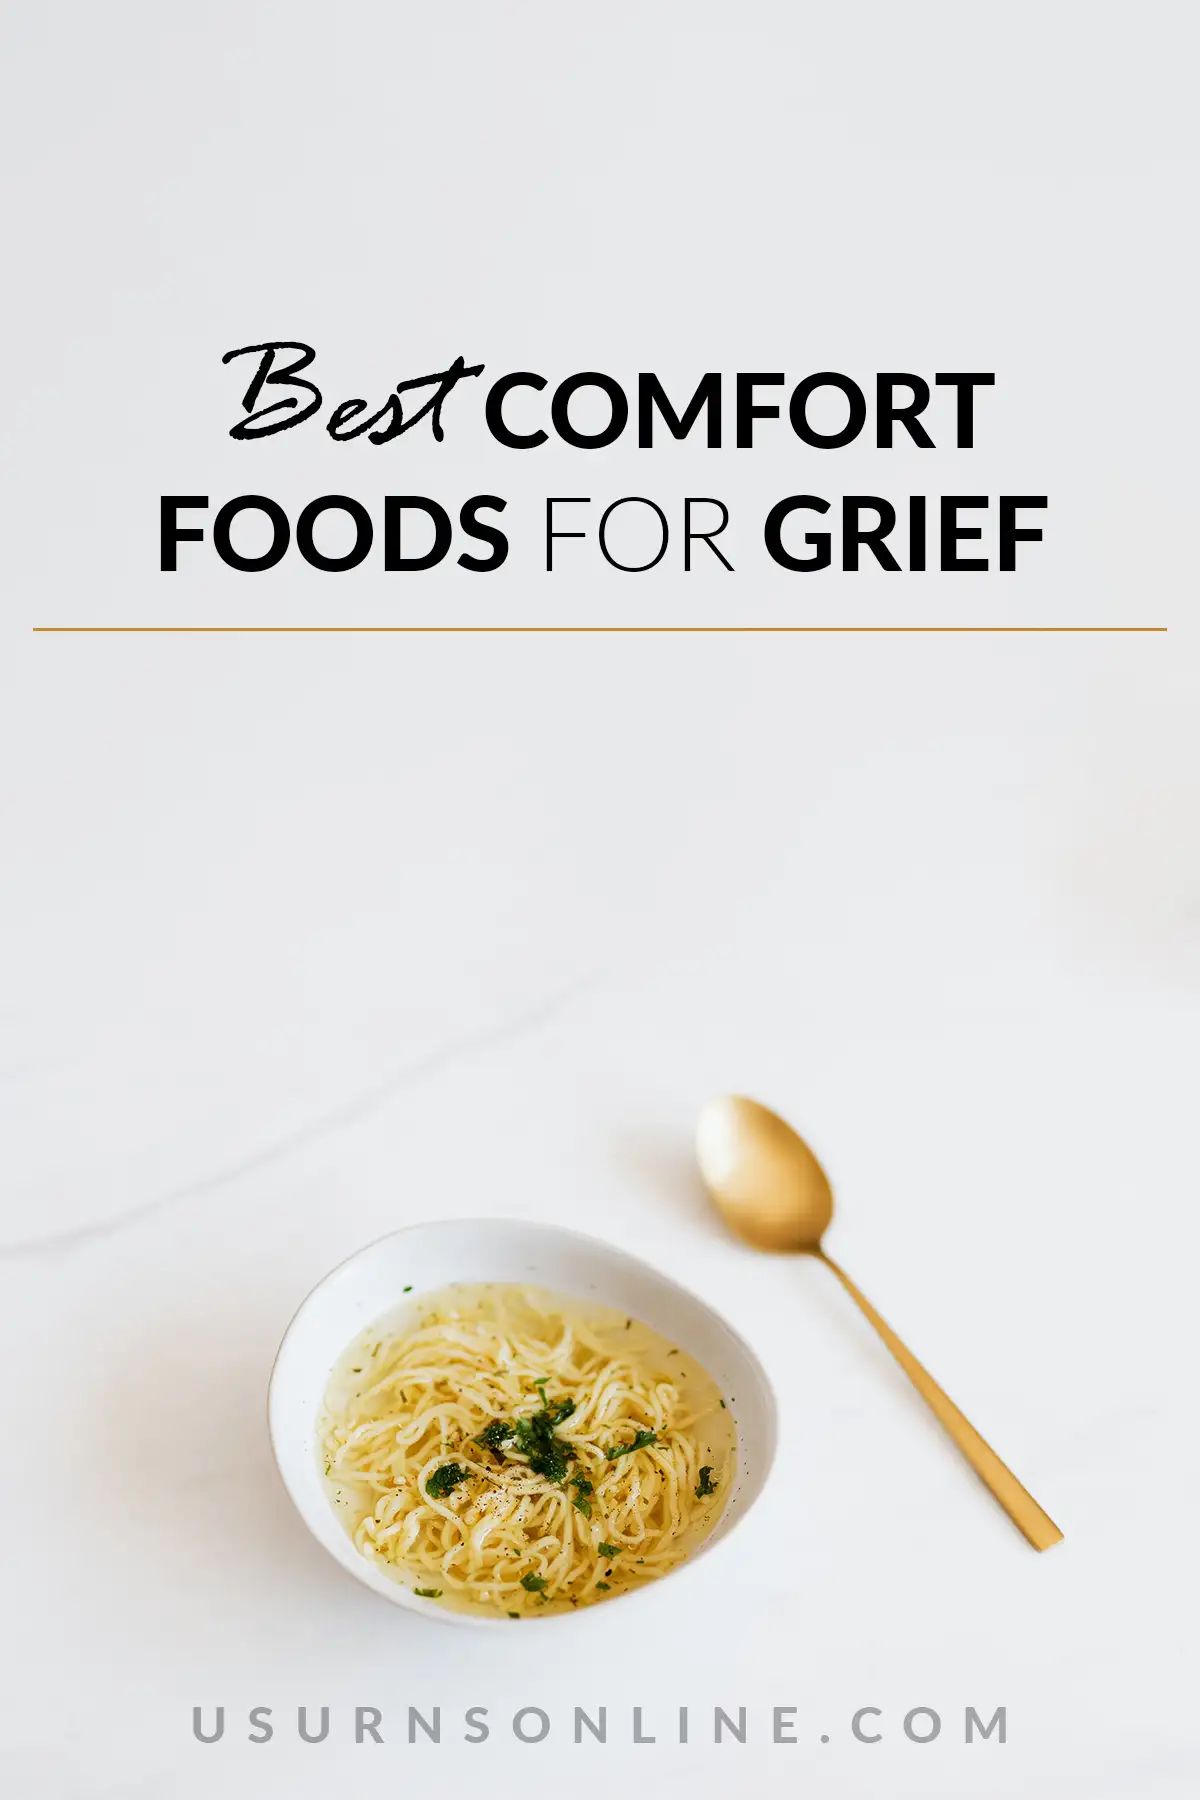 best comfort foods for grief - feature image